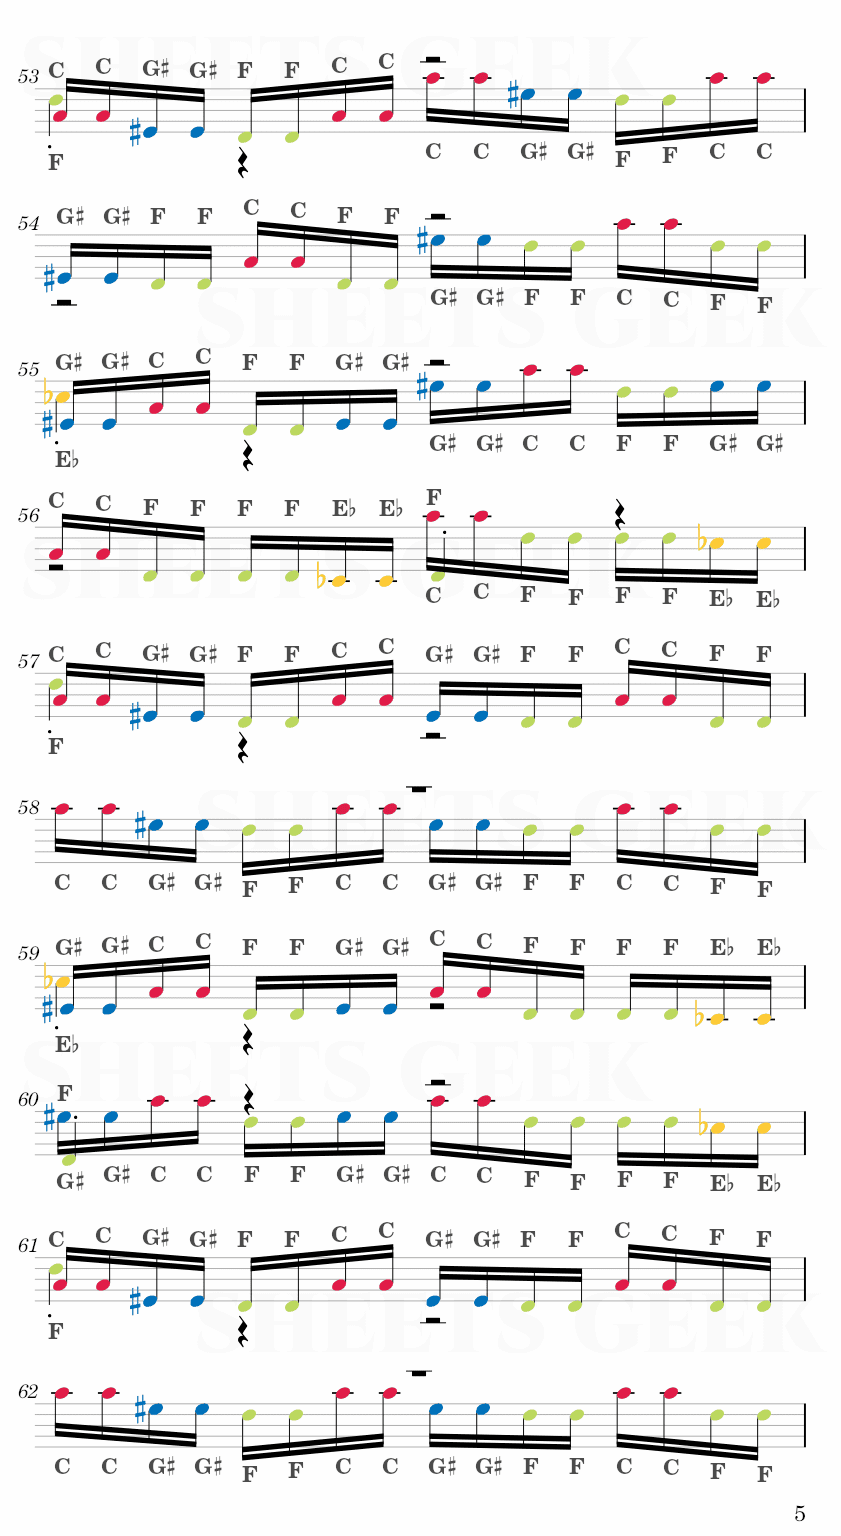 Ballistic - Friday Night Funkin' Vs. Whitty Easy Sheet Music Free for piano, keyboard, flute, violin, sax, cello page 5